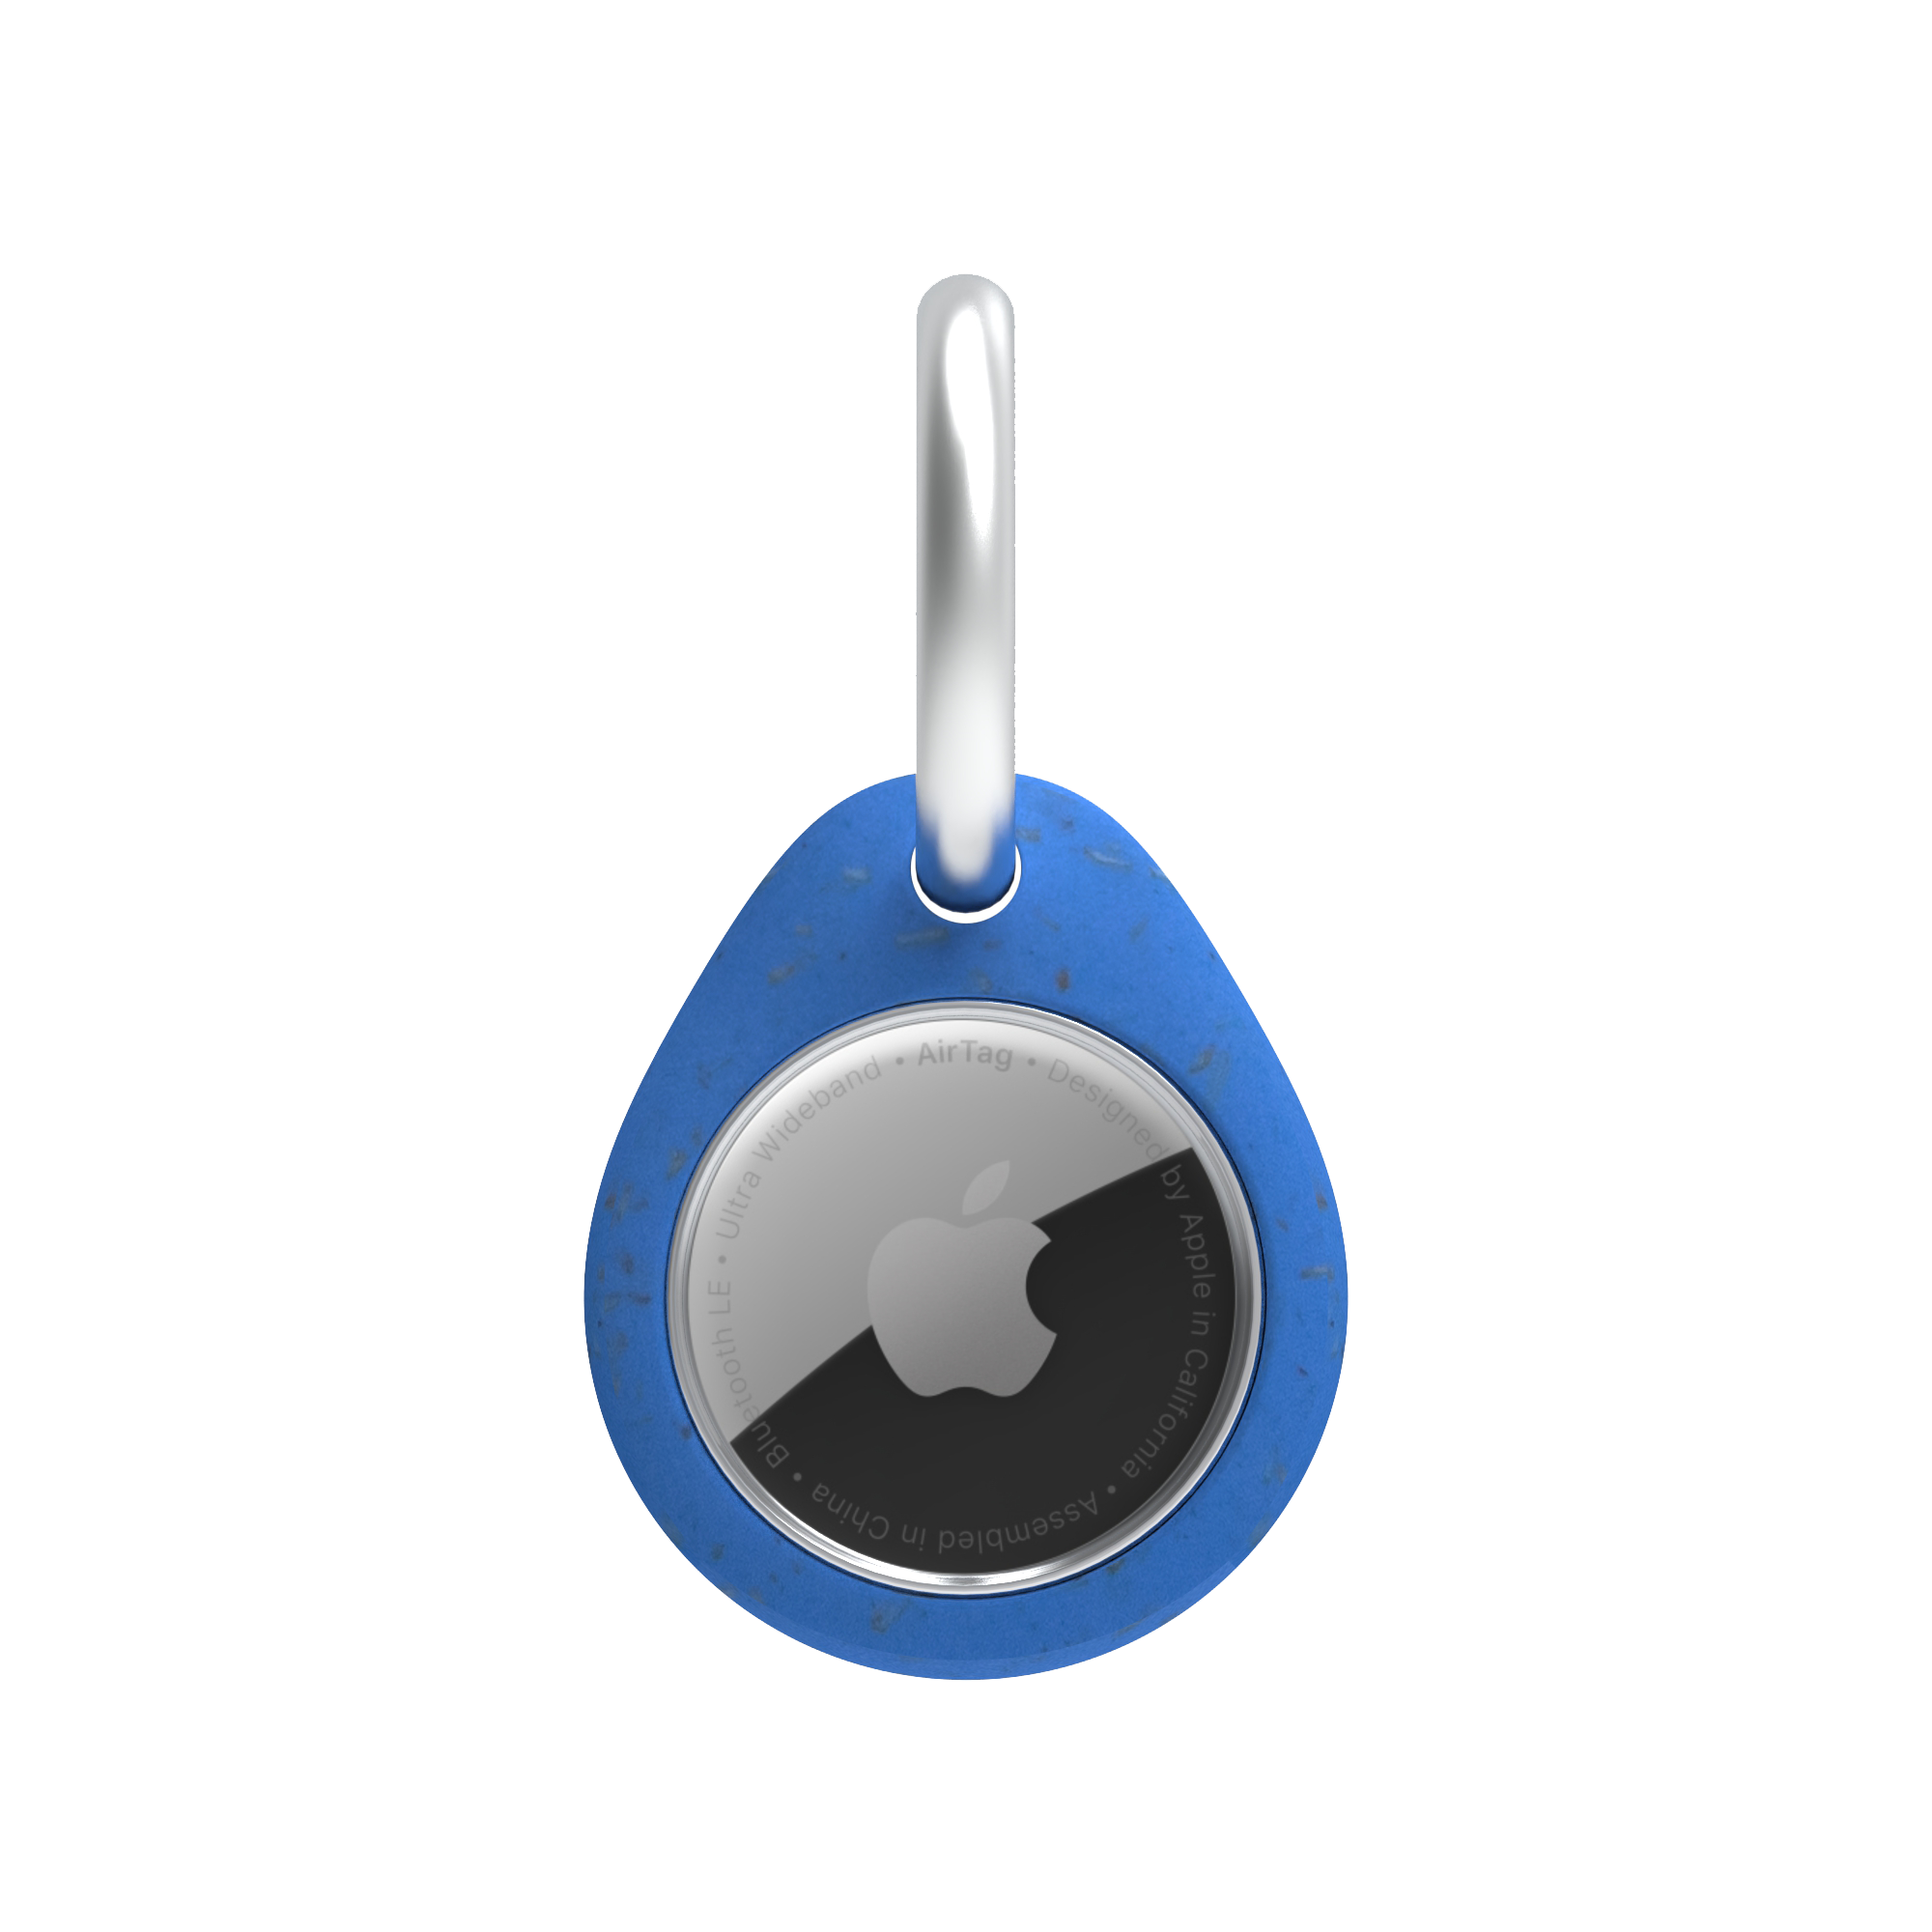 Blue Apple AirTag with a silver back and white loop against a white background.